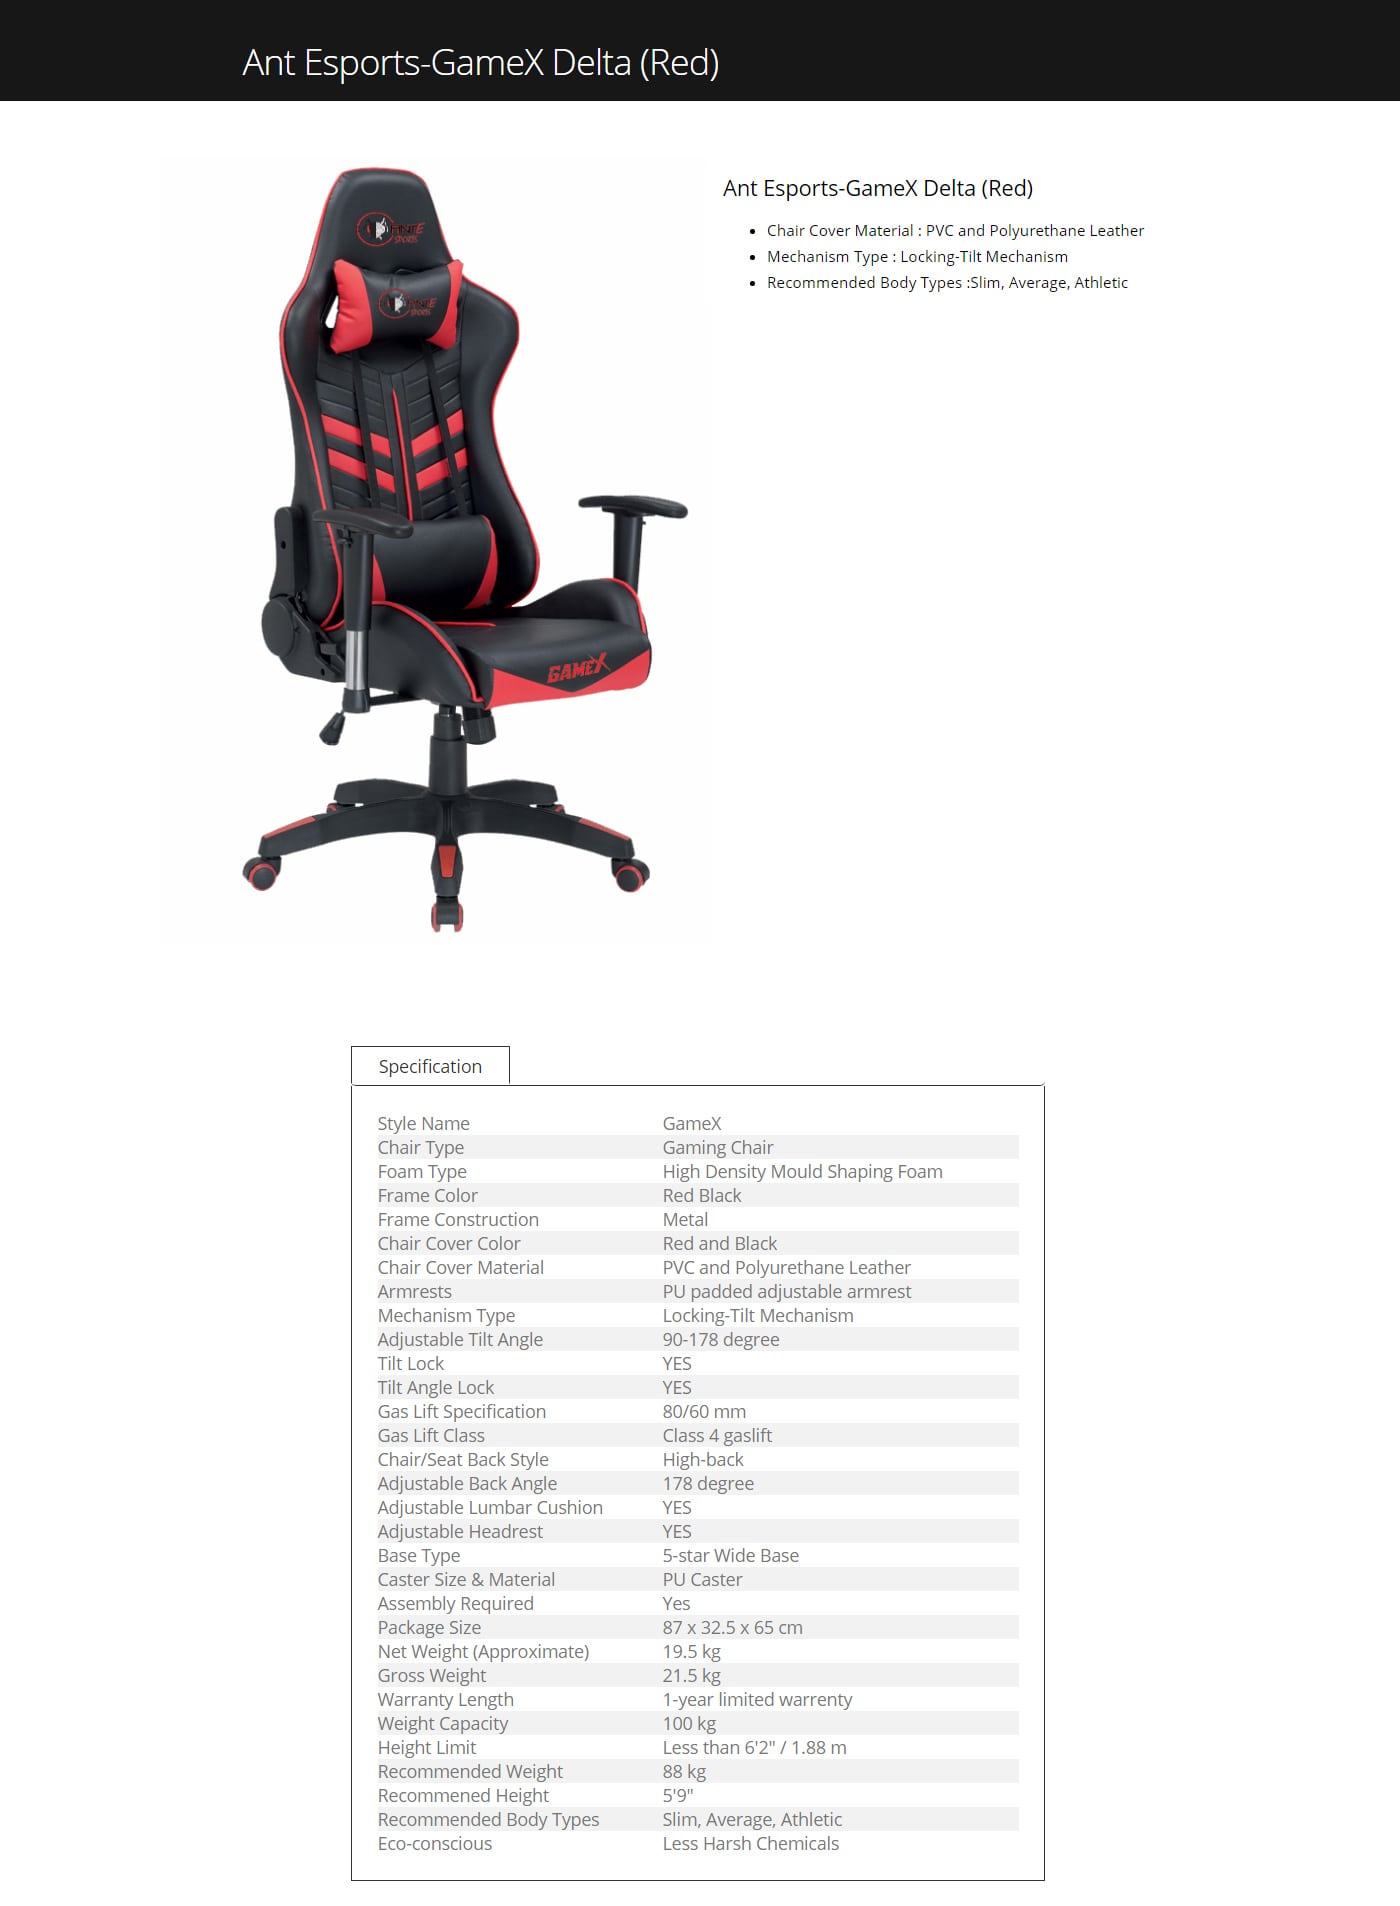  Buy Online Ant Esports GameX Delta Gaming Chair - Red 